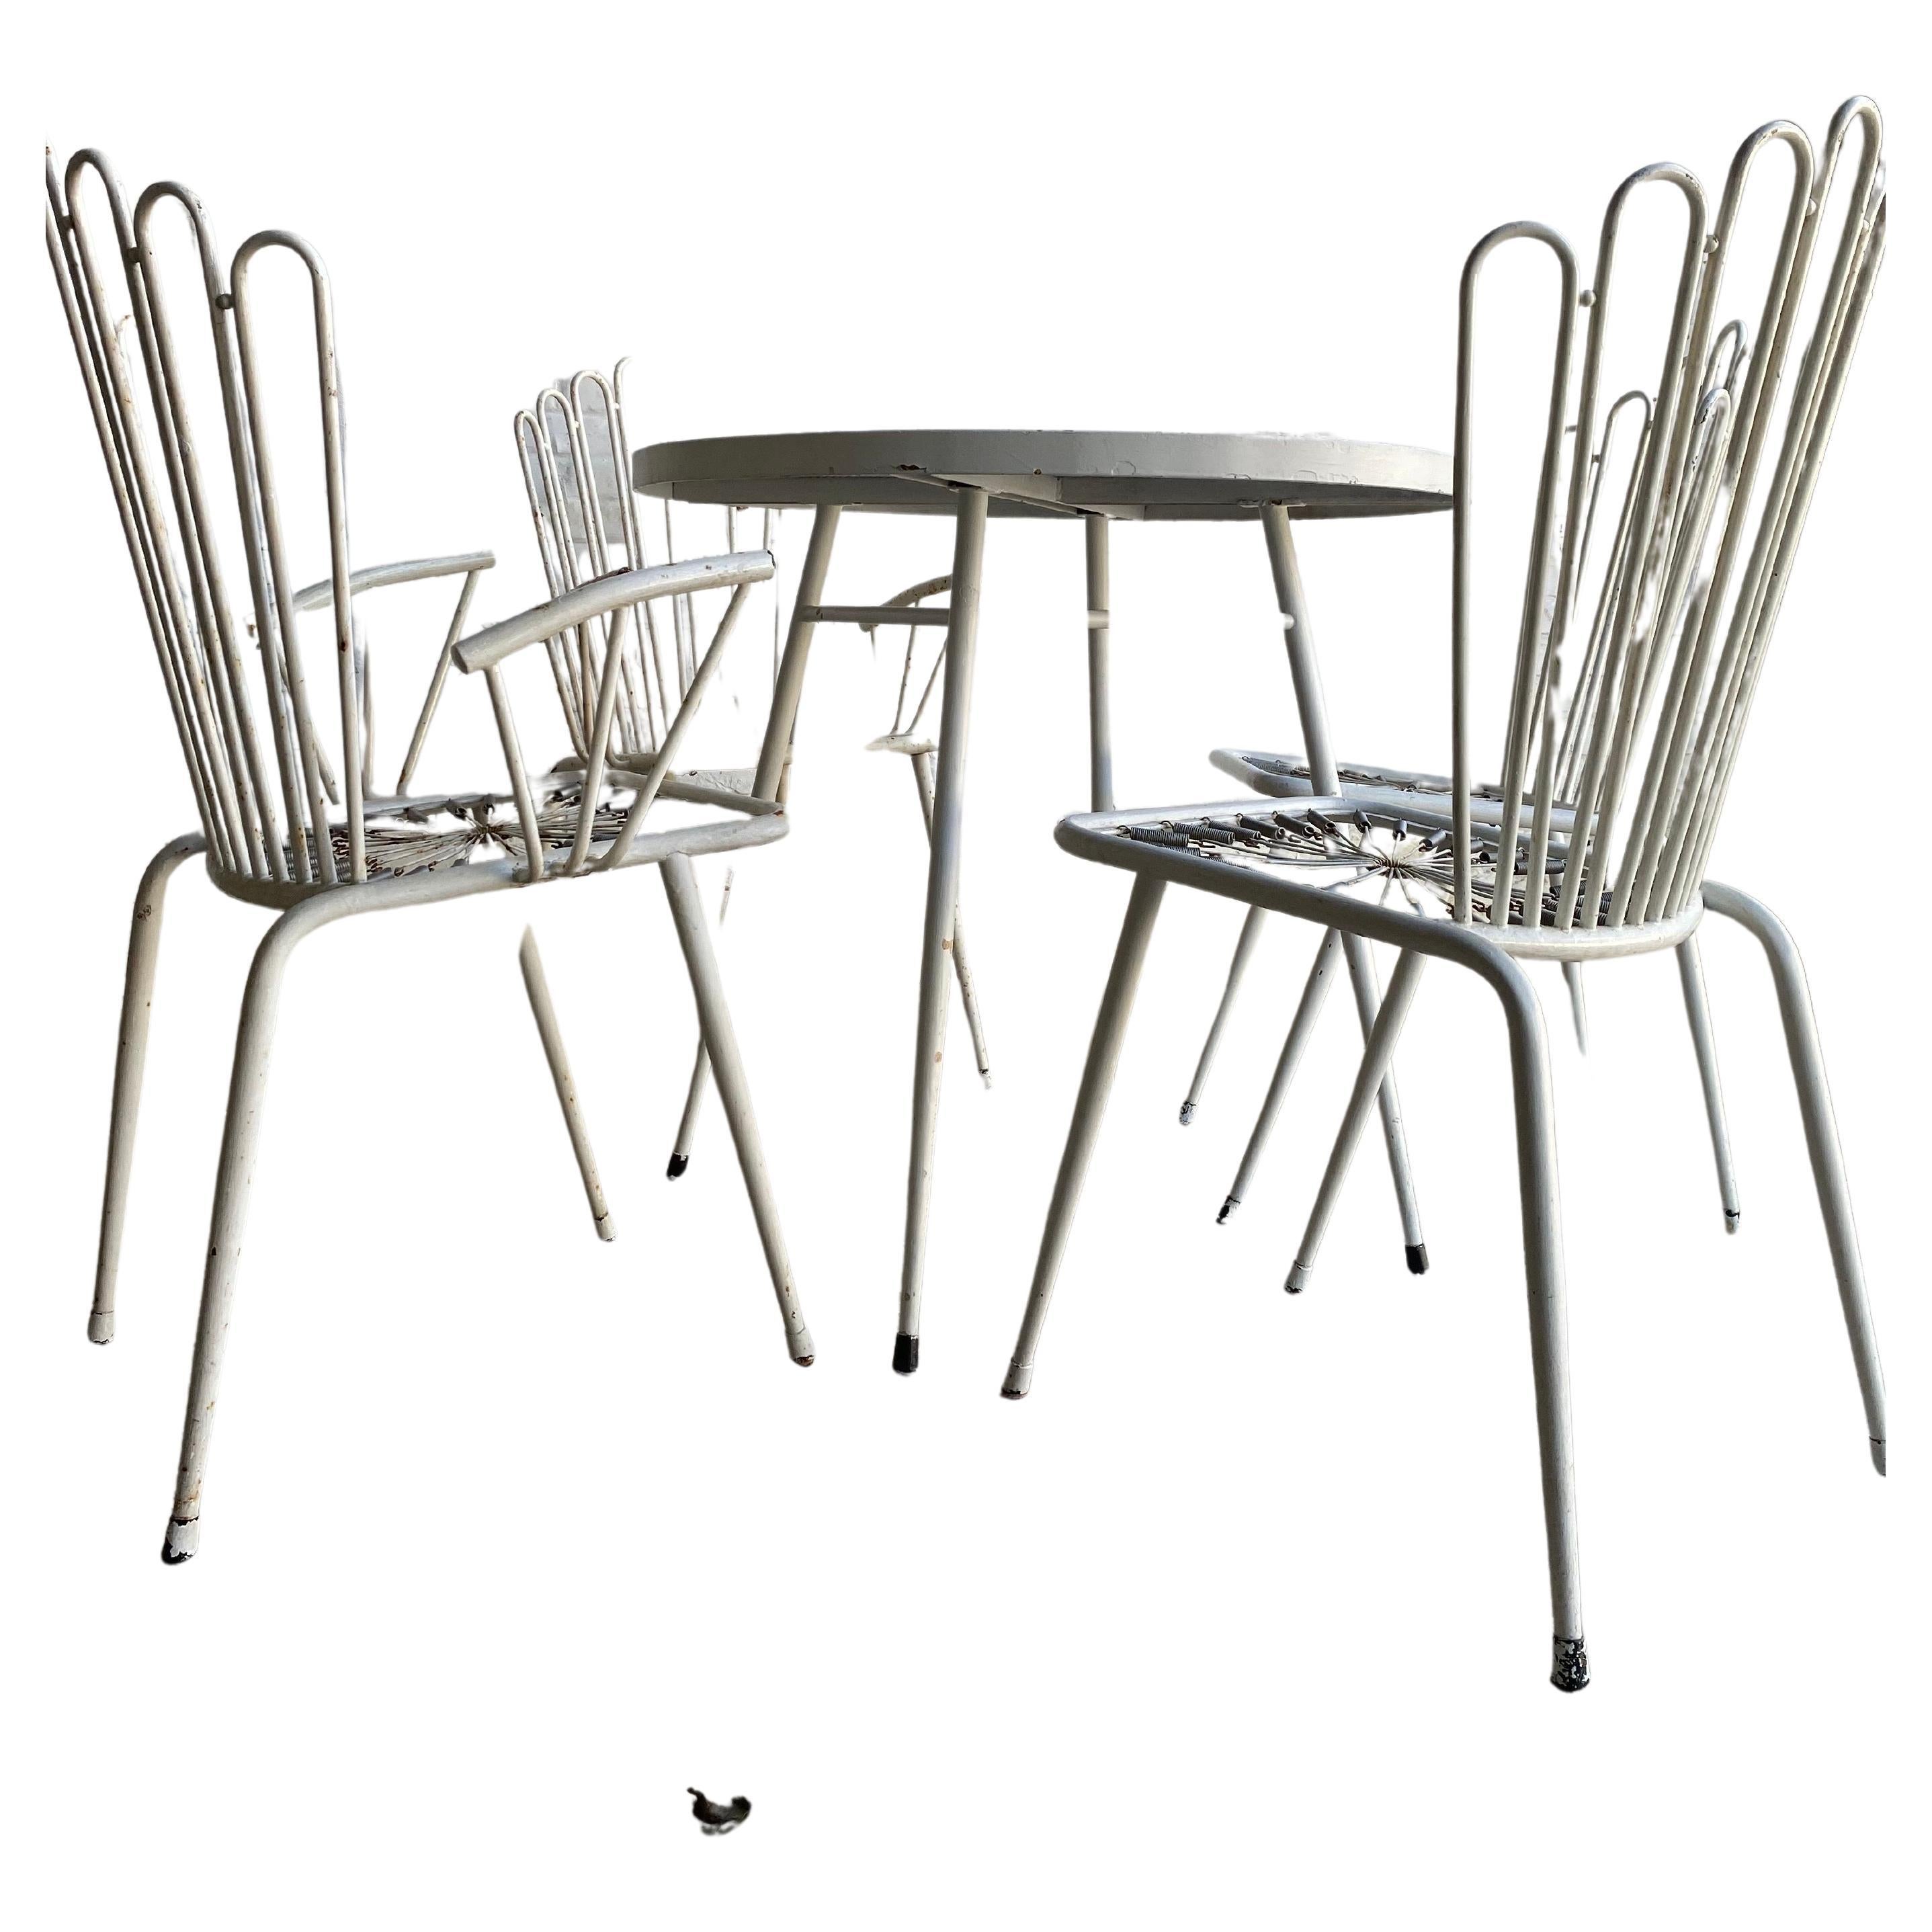 Patio Set in Style of Mathieu Mategot Table and Chairs 1950, France 3